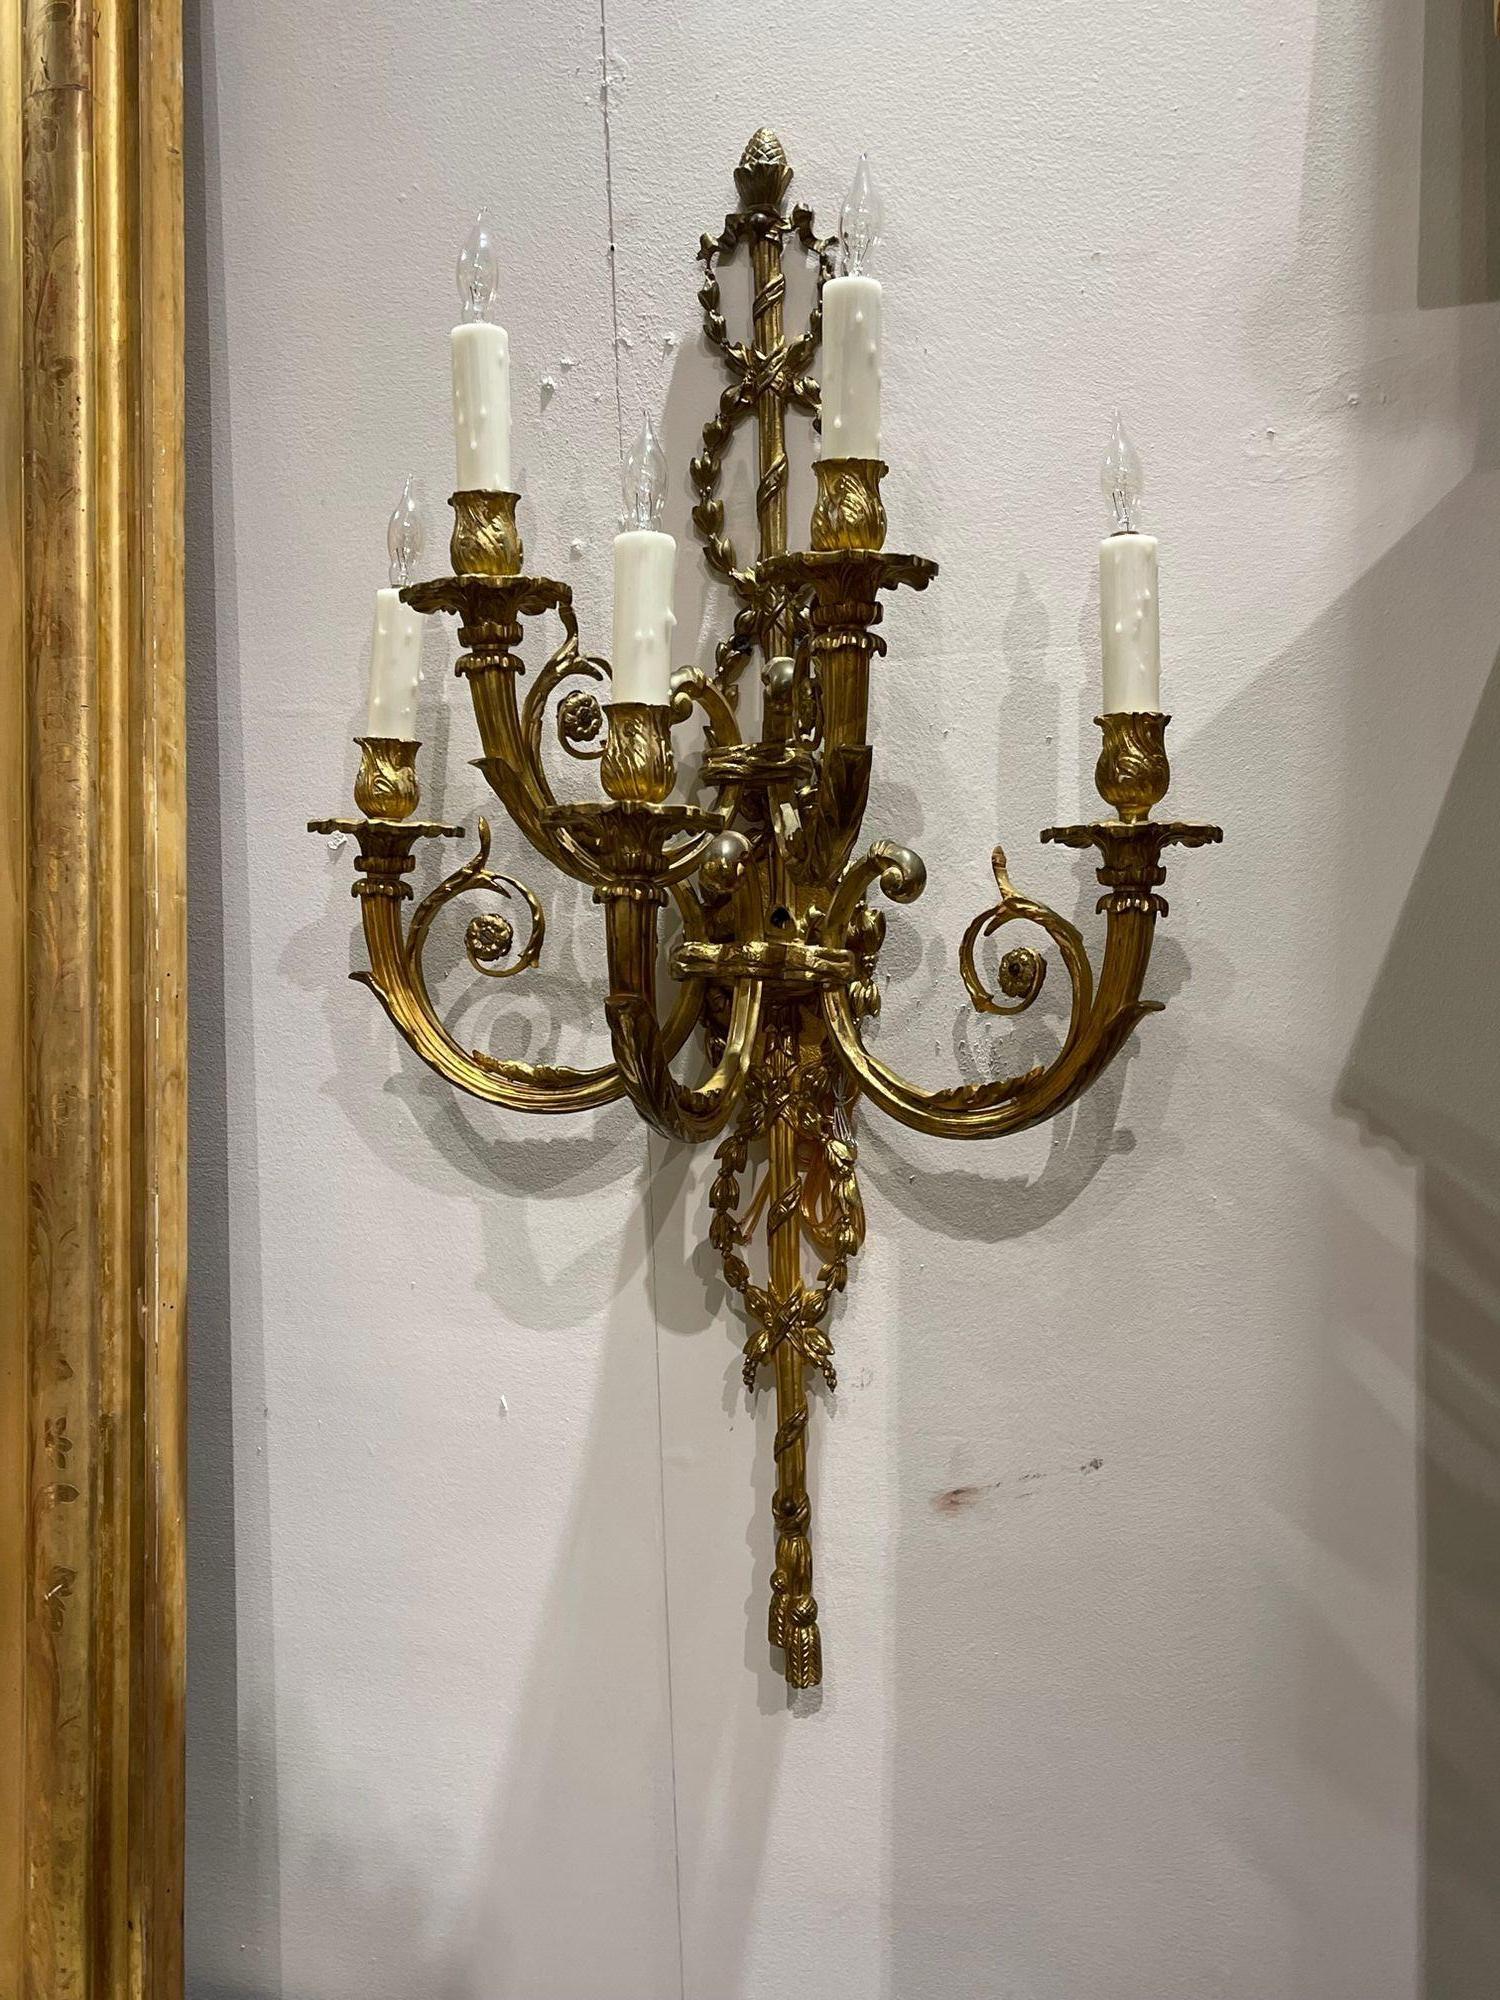 Exquisite pair of 19th century French Louis XVI style gilt bronze wall sconces with 5 lights. Beautiful designs including floral designs, decorative rope and a acorn finial at the top. A true classic that is sure to impress!!